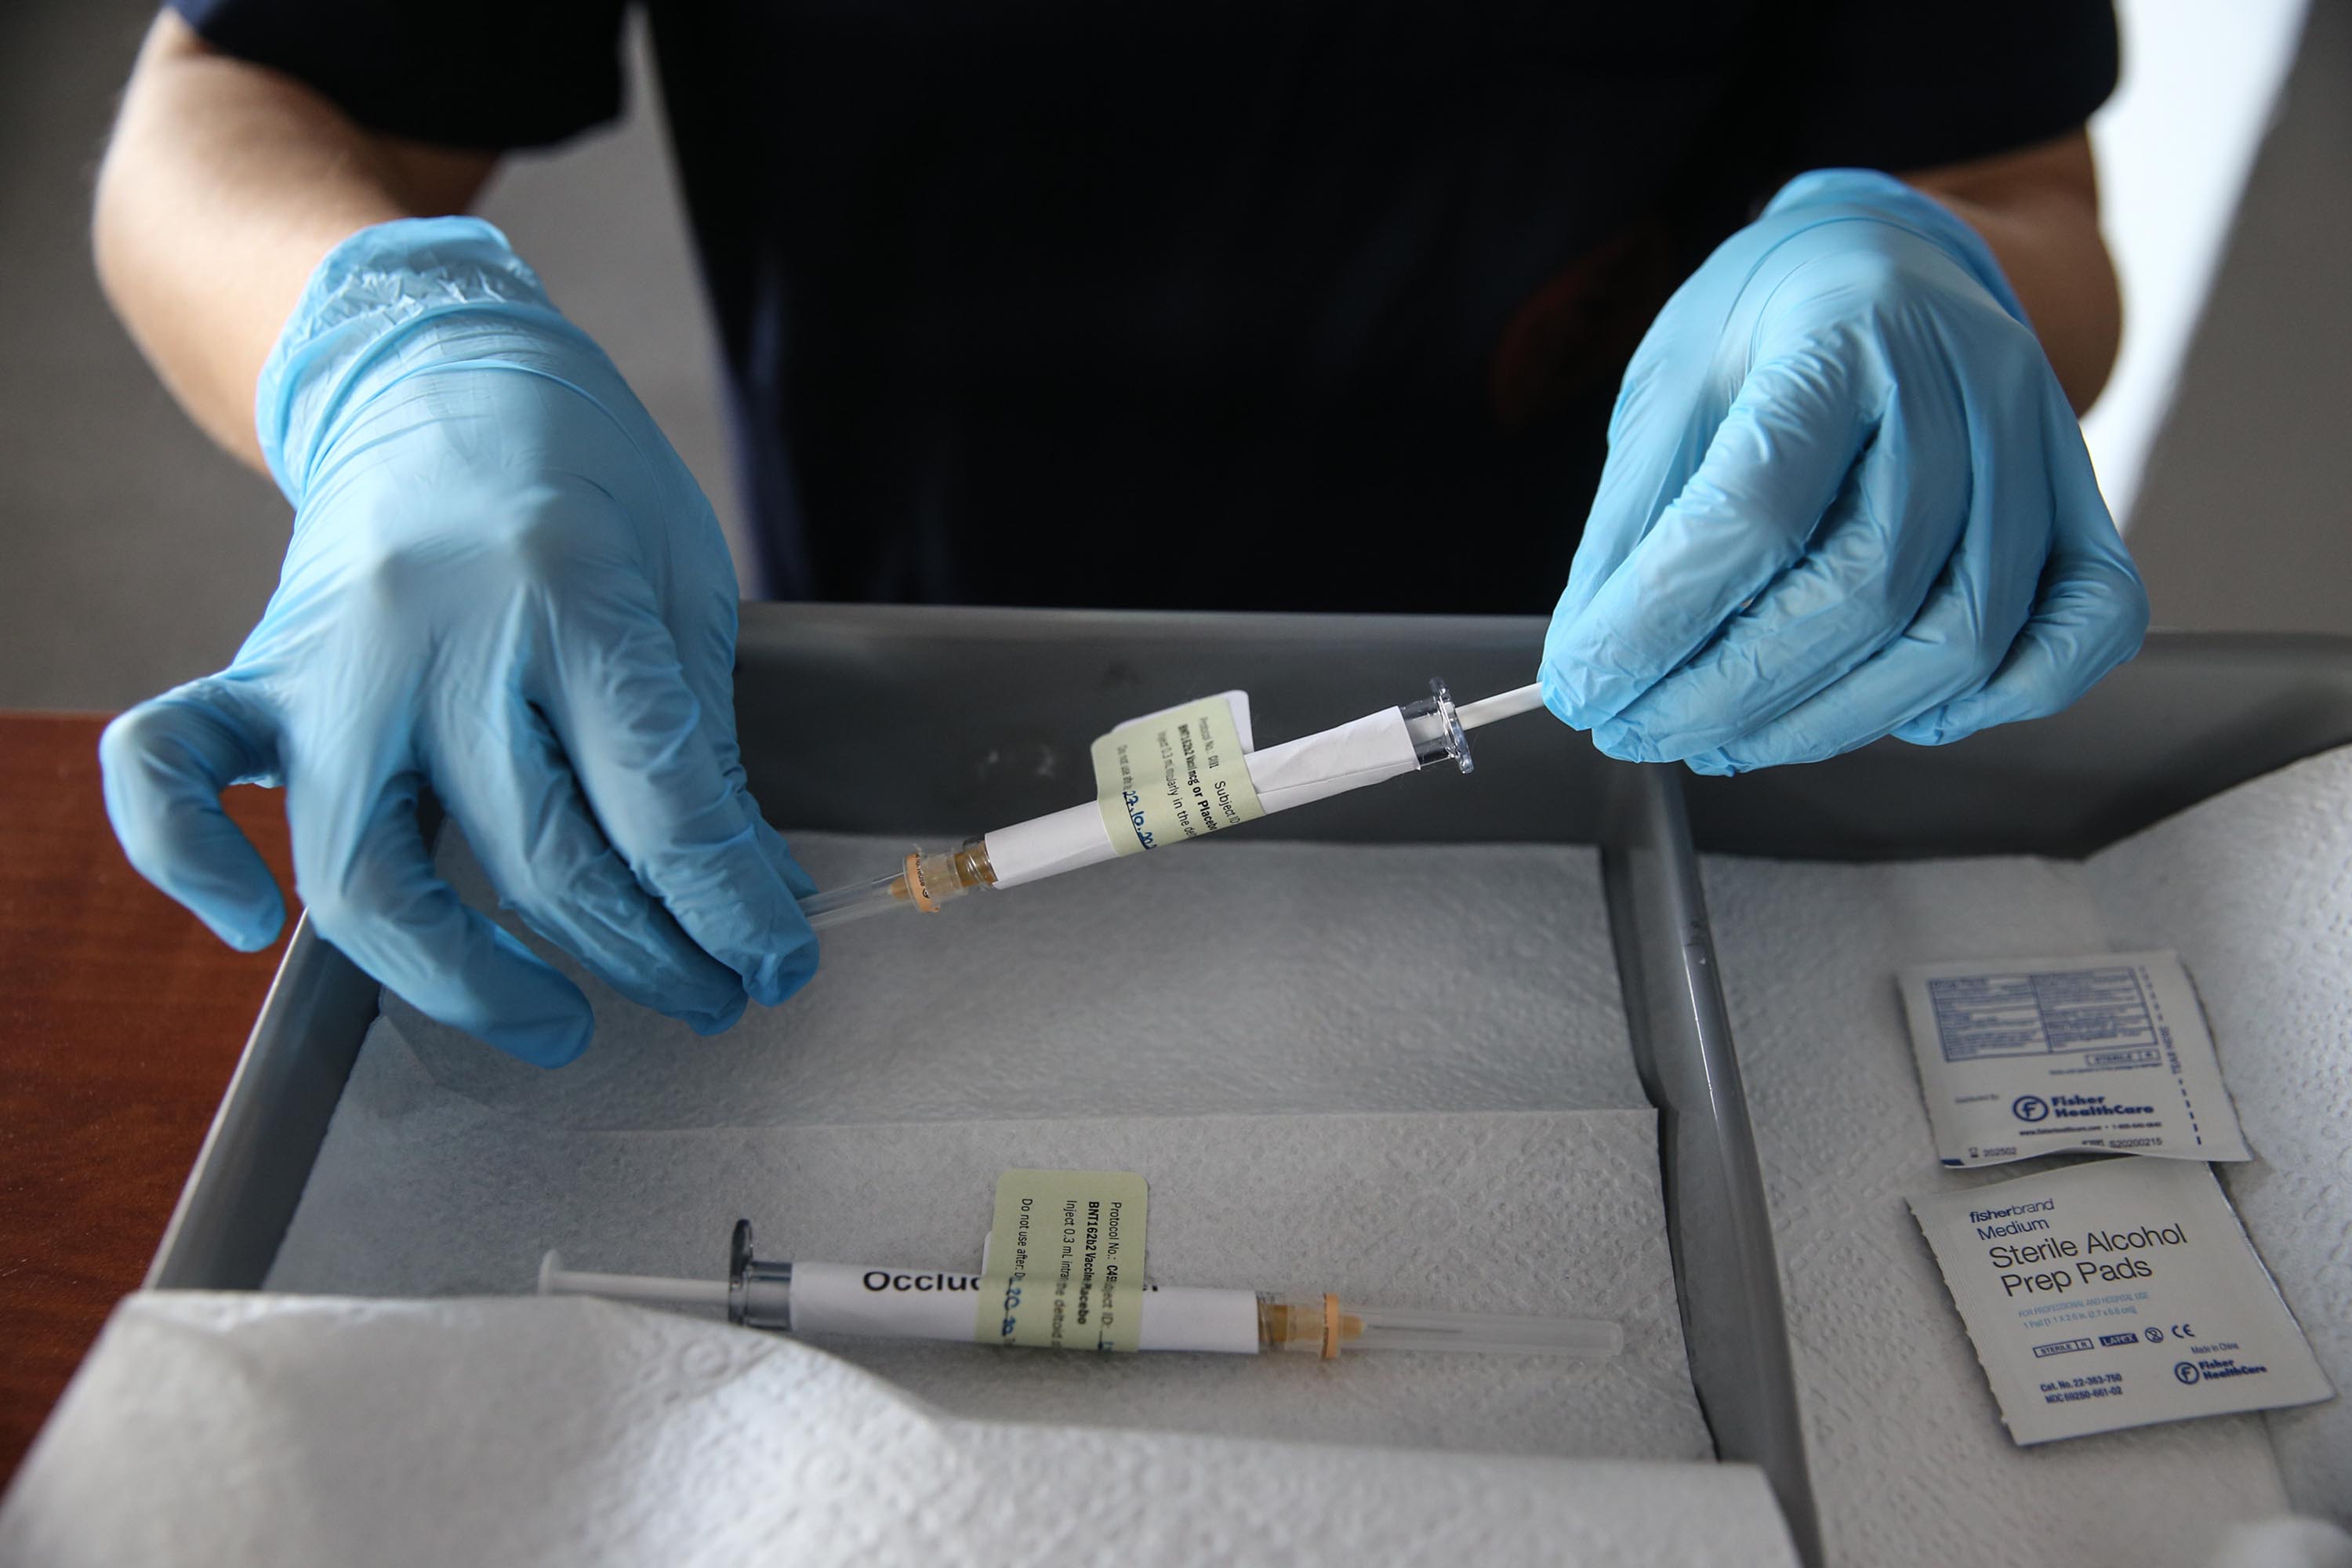 A health care worker holds an injection syringe of the coronavirus phase 3 vaccine trial developed by Pfizer and BioNTech, at the Ankara University Ibni Sina Hospital in Ankara, Turkey on October 27.